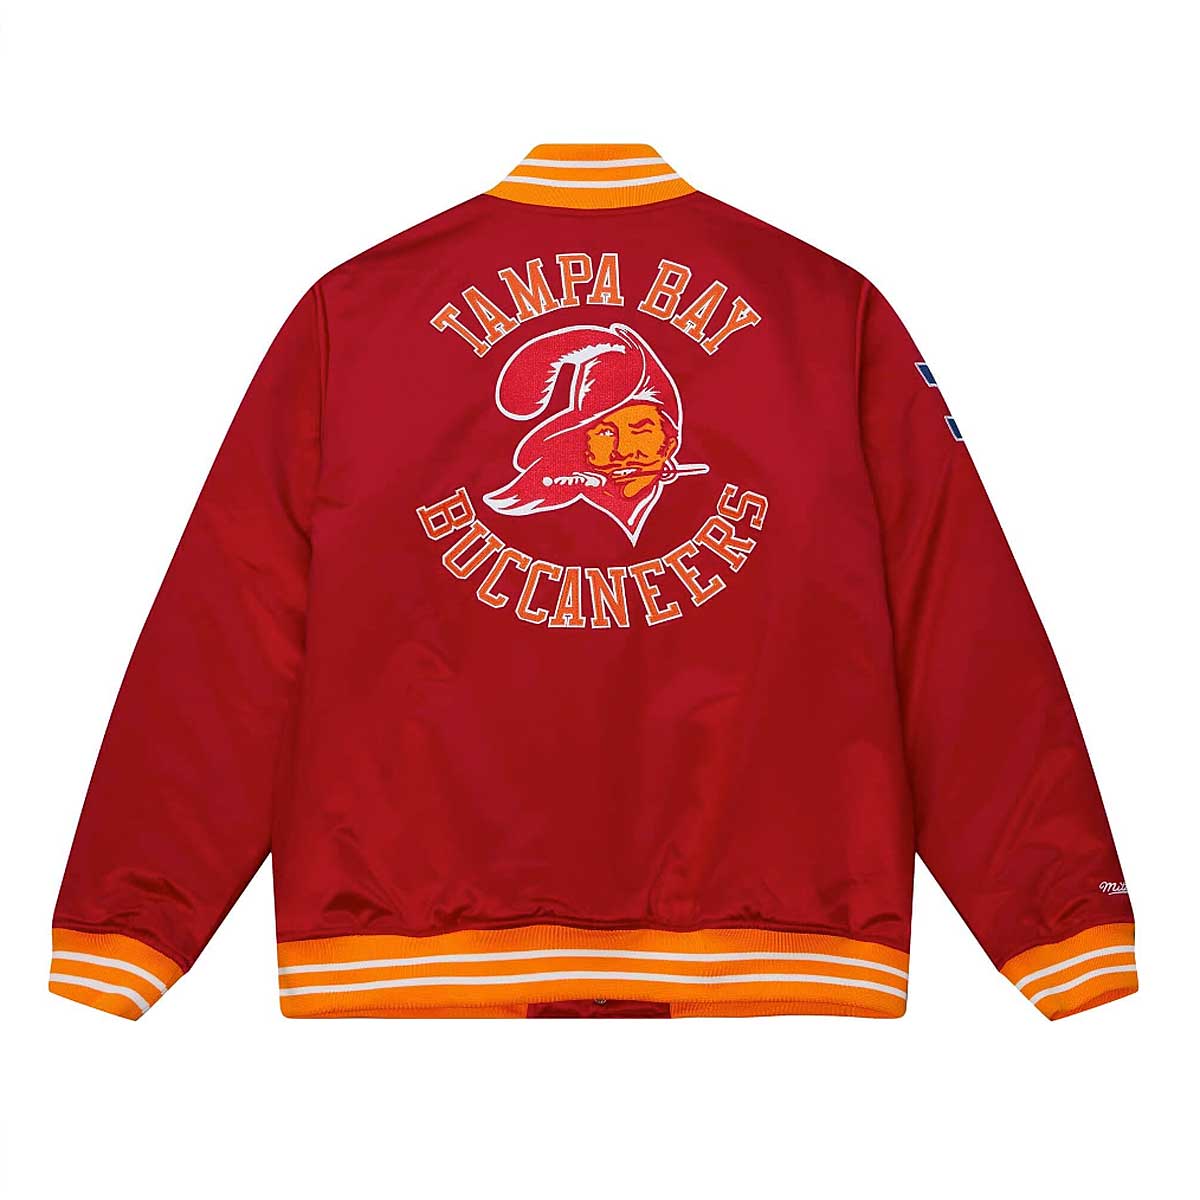 Mitchell And Ness Nfl Tampa Bay Buccaneers Heavyweight Satin Jacket, Scarlet